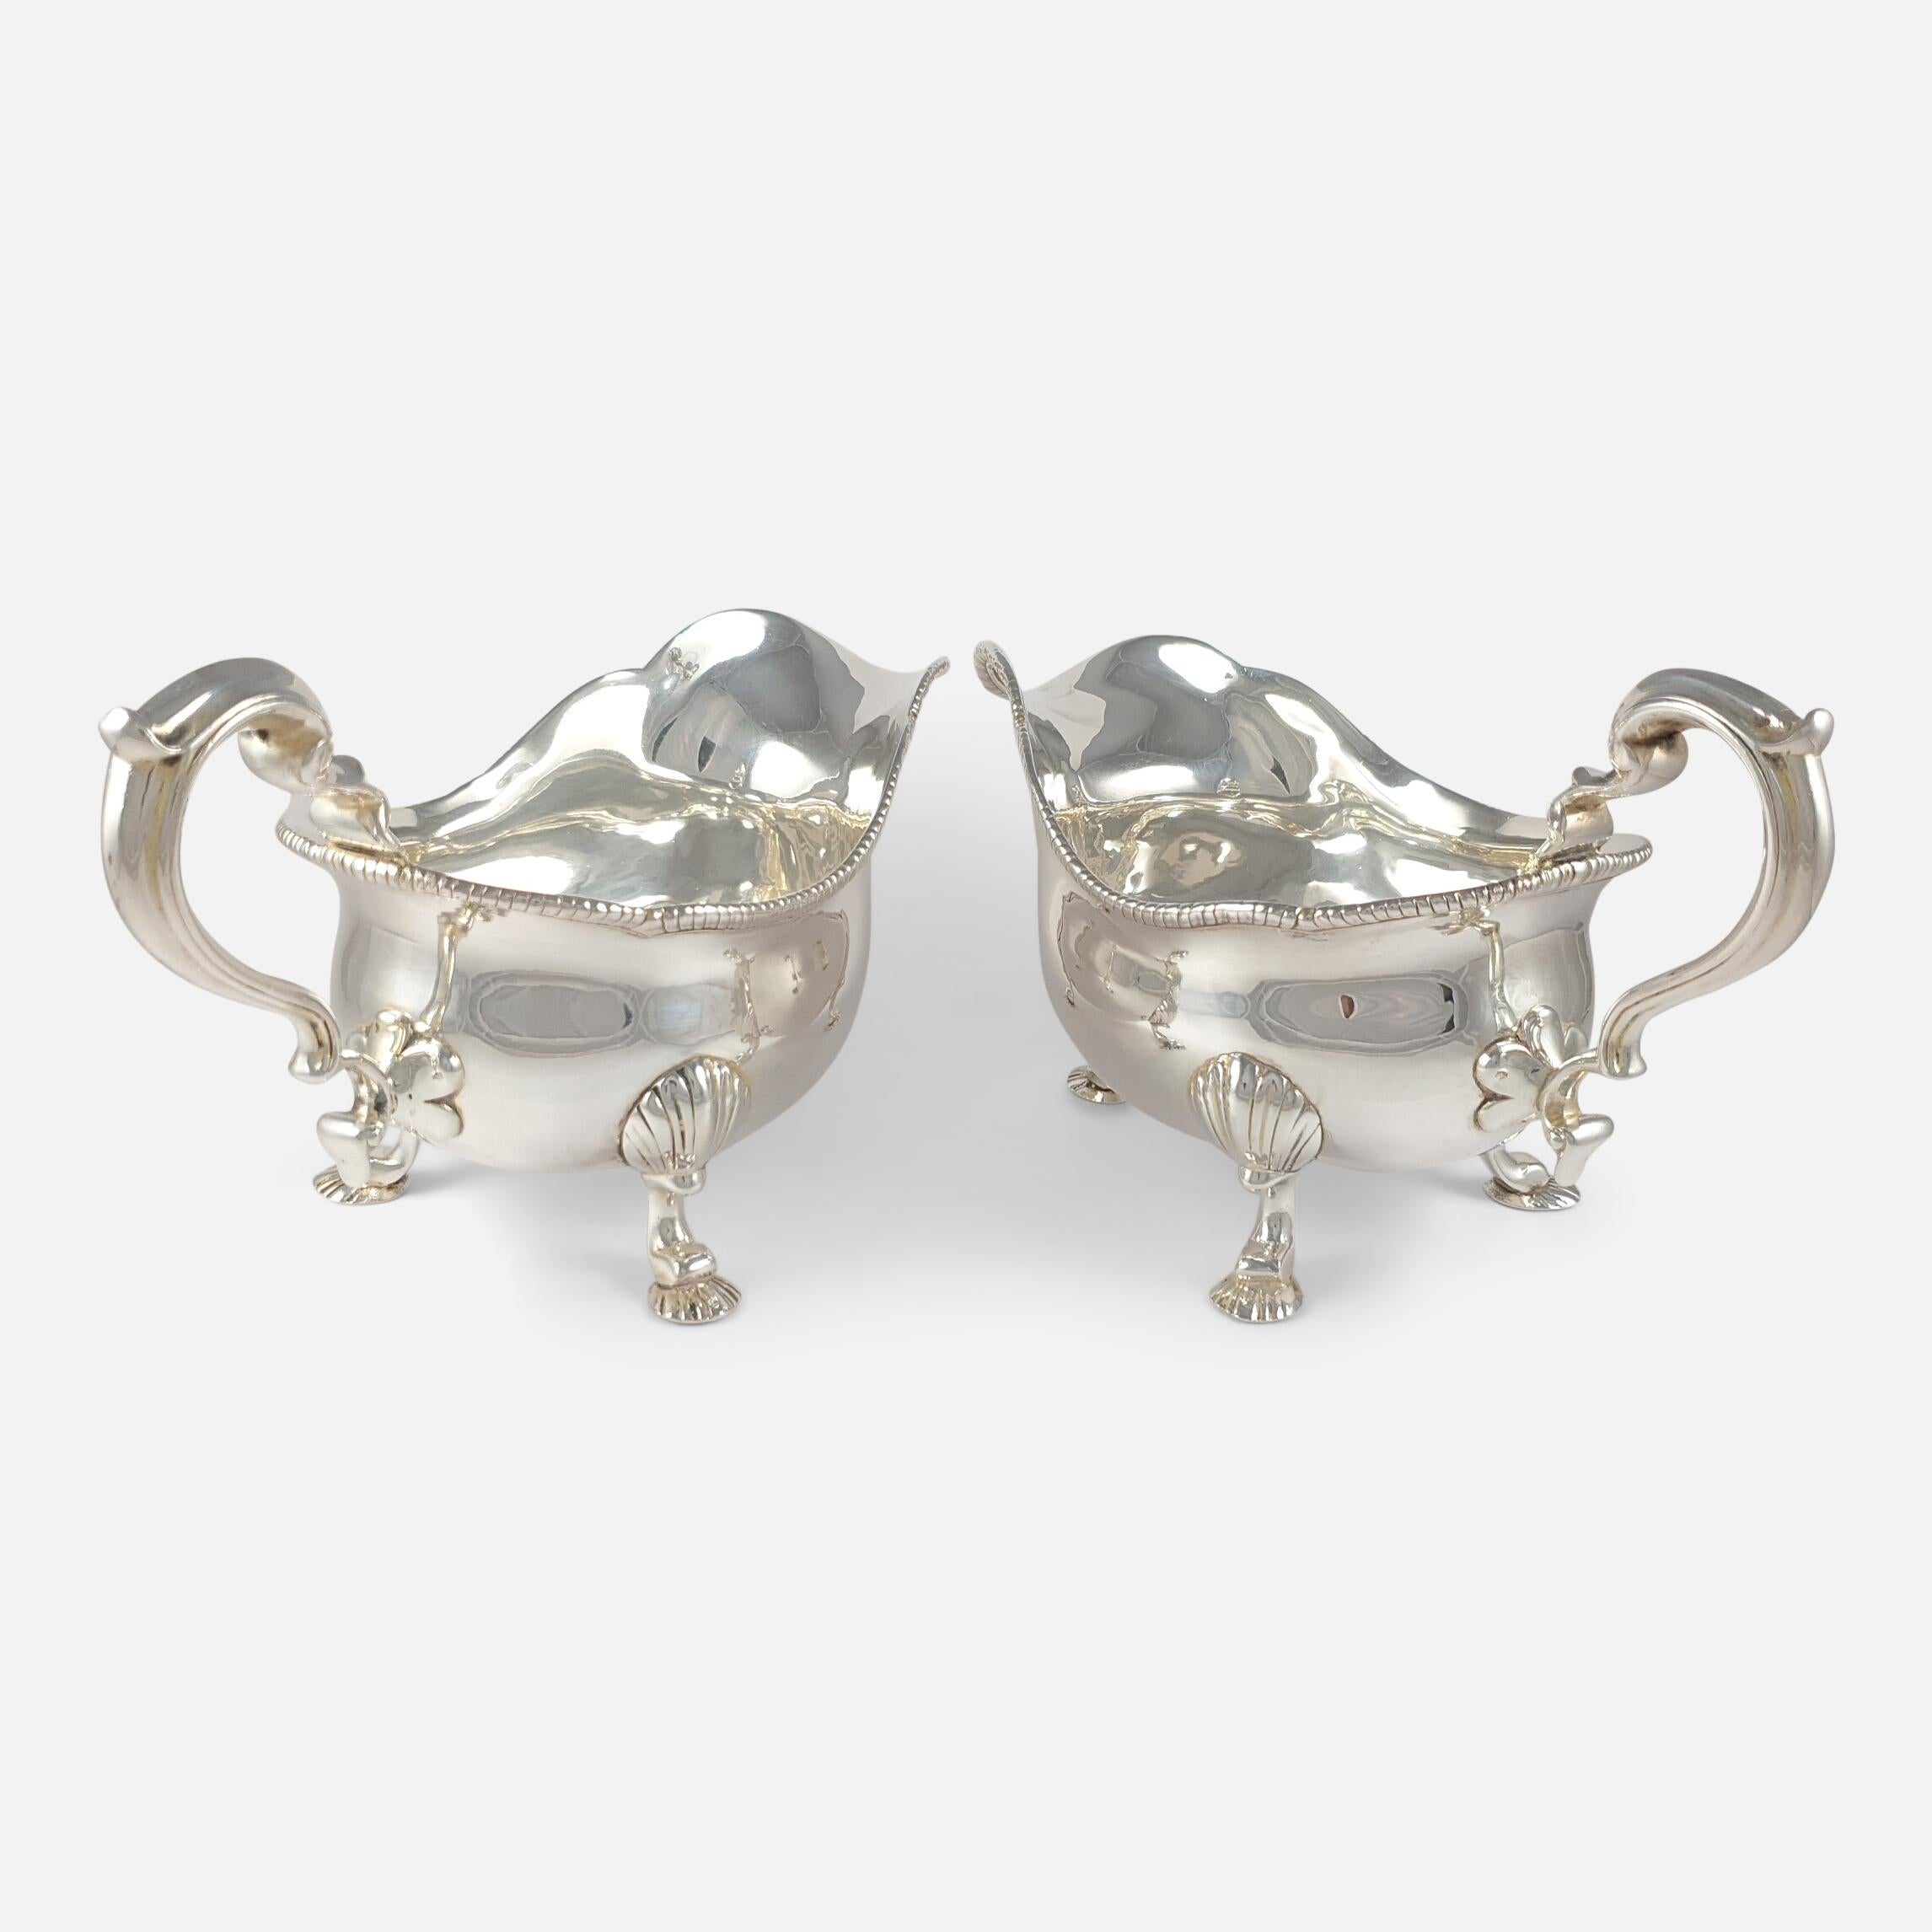 British Pair of Victorian Silver Sauce Boats, D and C Houle, 1841, 1039.7 grams For Sale